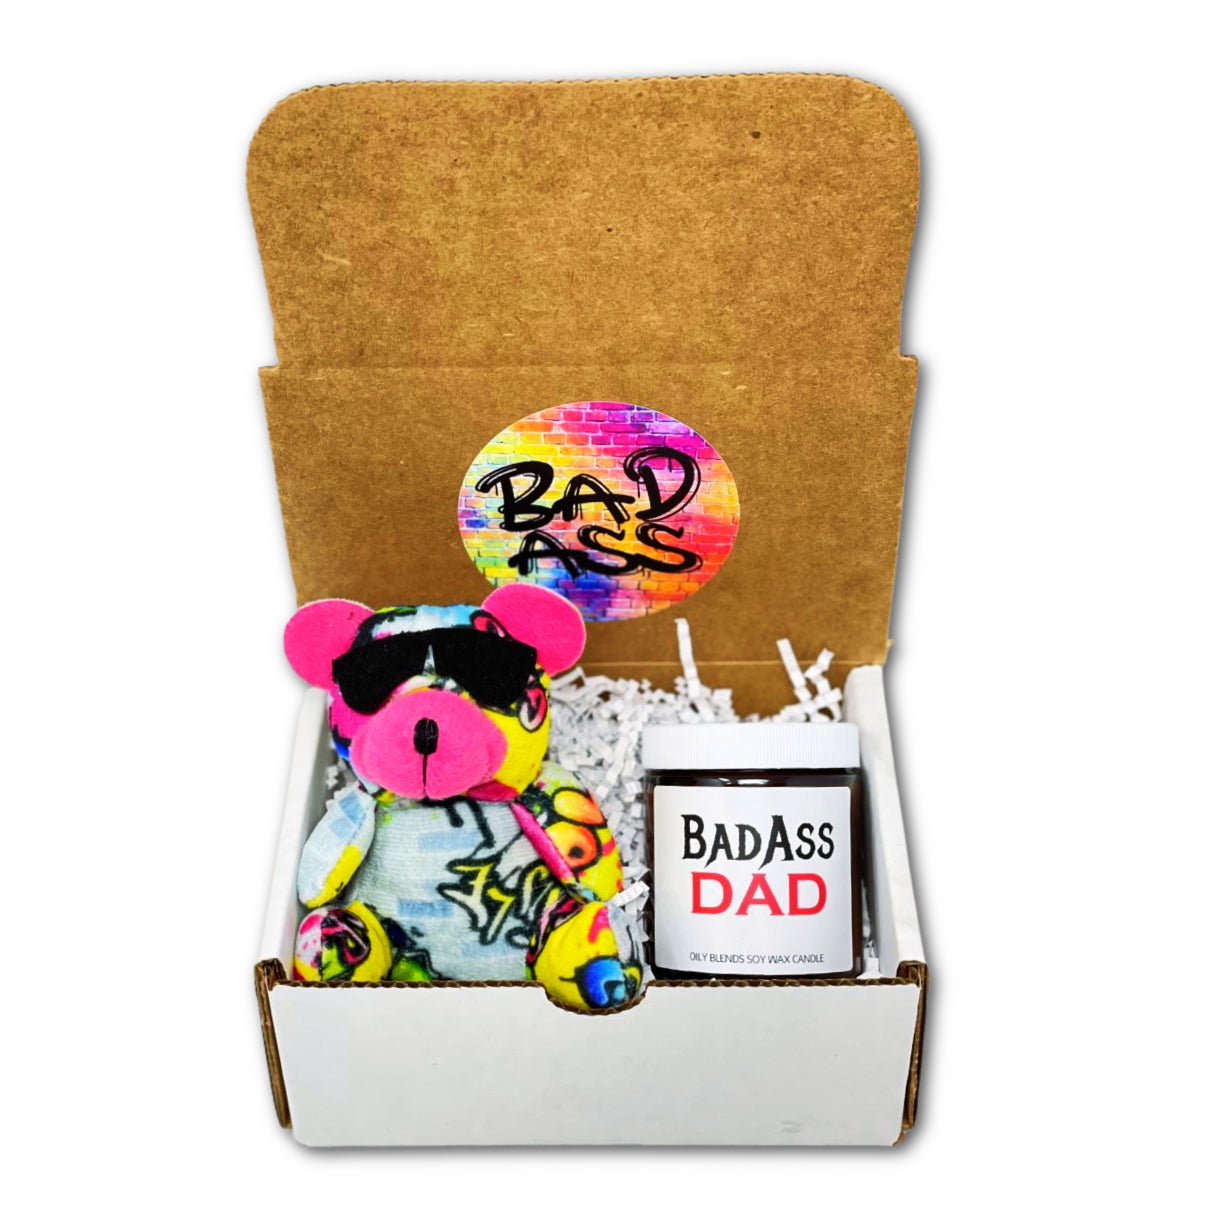 Bad Ass Gift Sets - Includes candles and badass plush - Spellbound